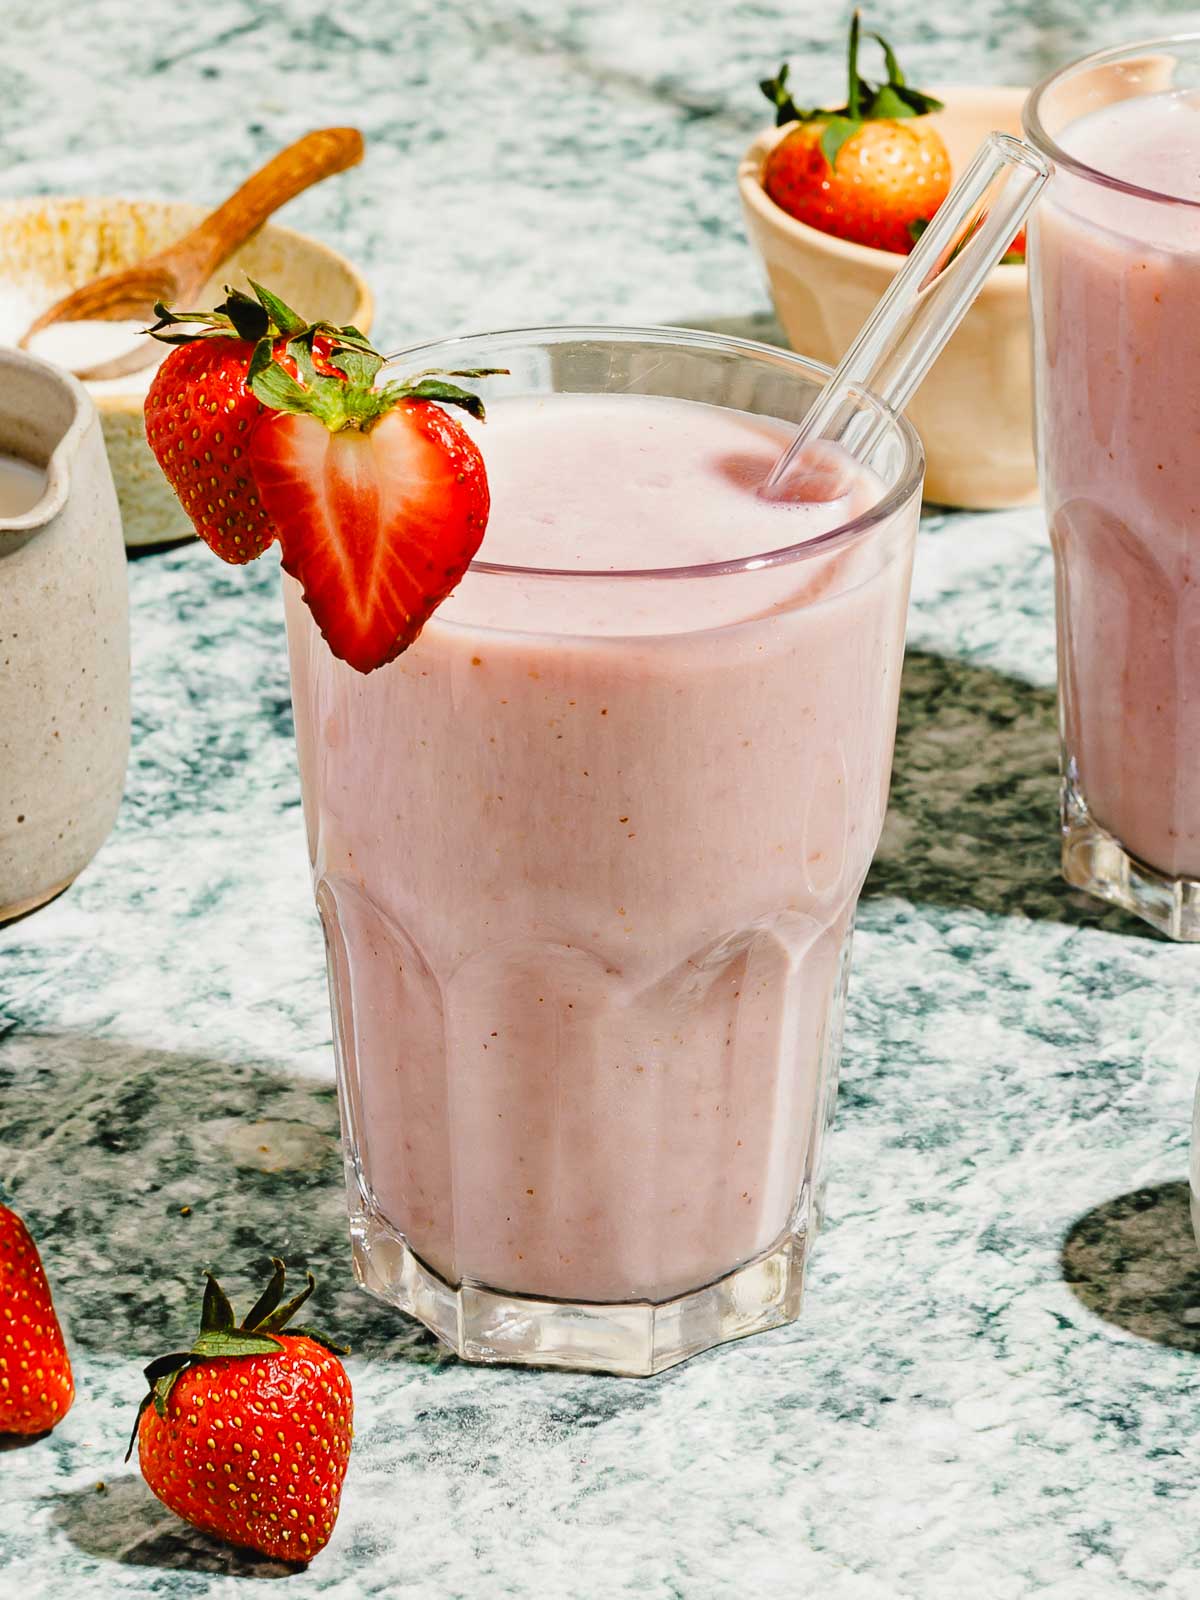 Image shows a glass of strawberry almond milk blended to creamy frothy, garnish with strawberry on top in a glass.